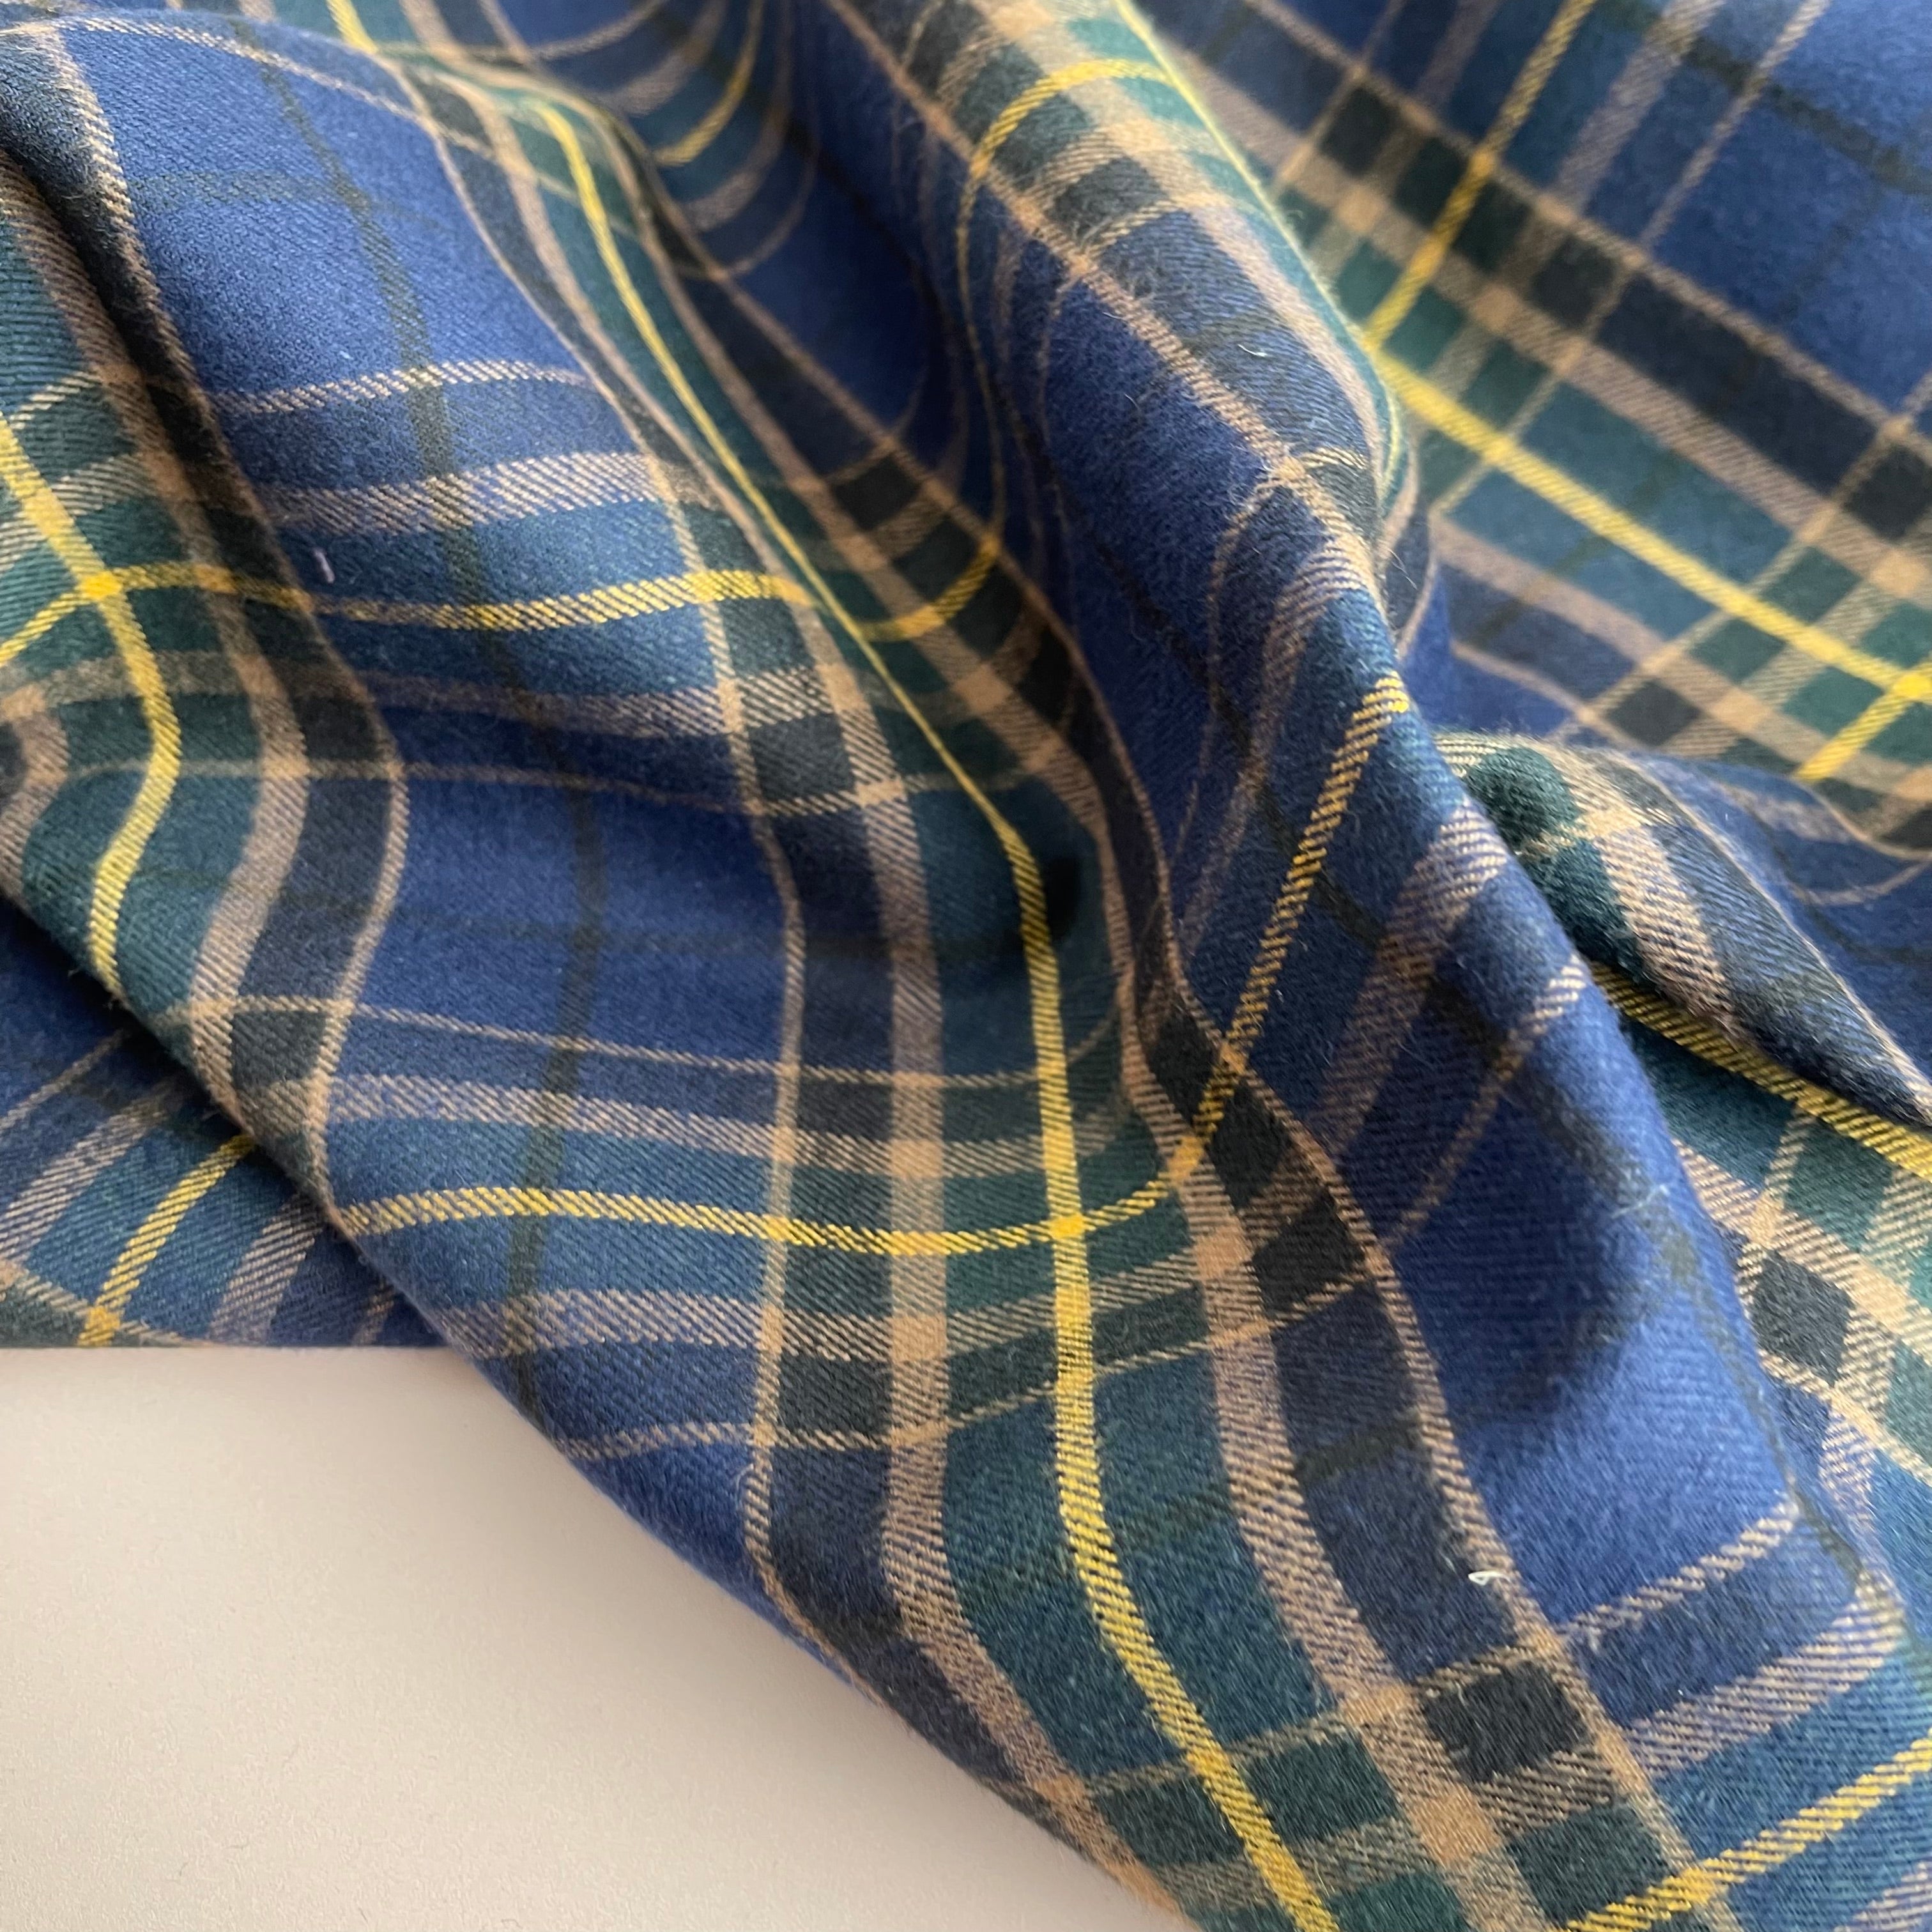 Highland Navy with Brown and Gold Yarn Dyed Cotton Flannel